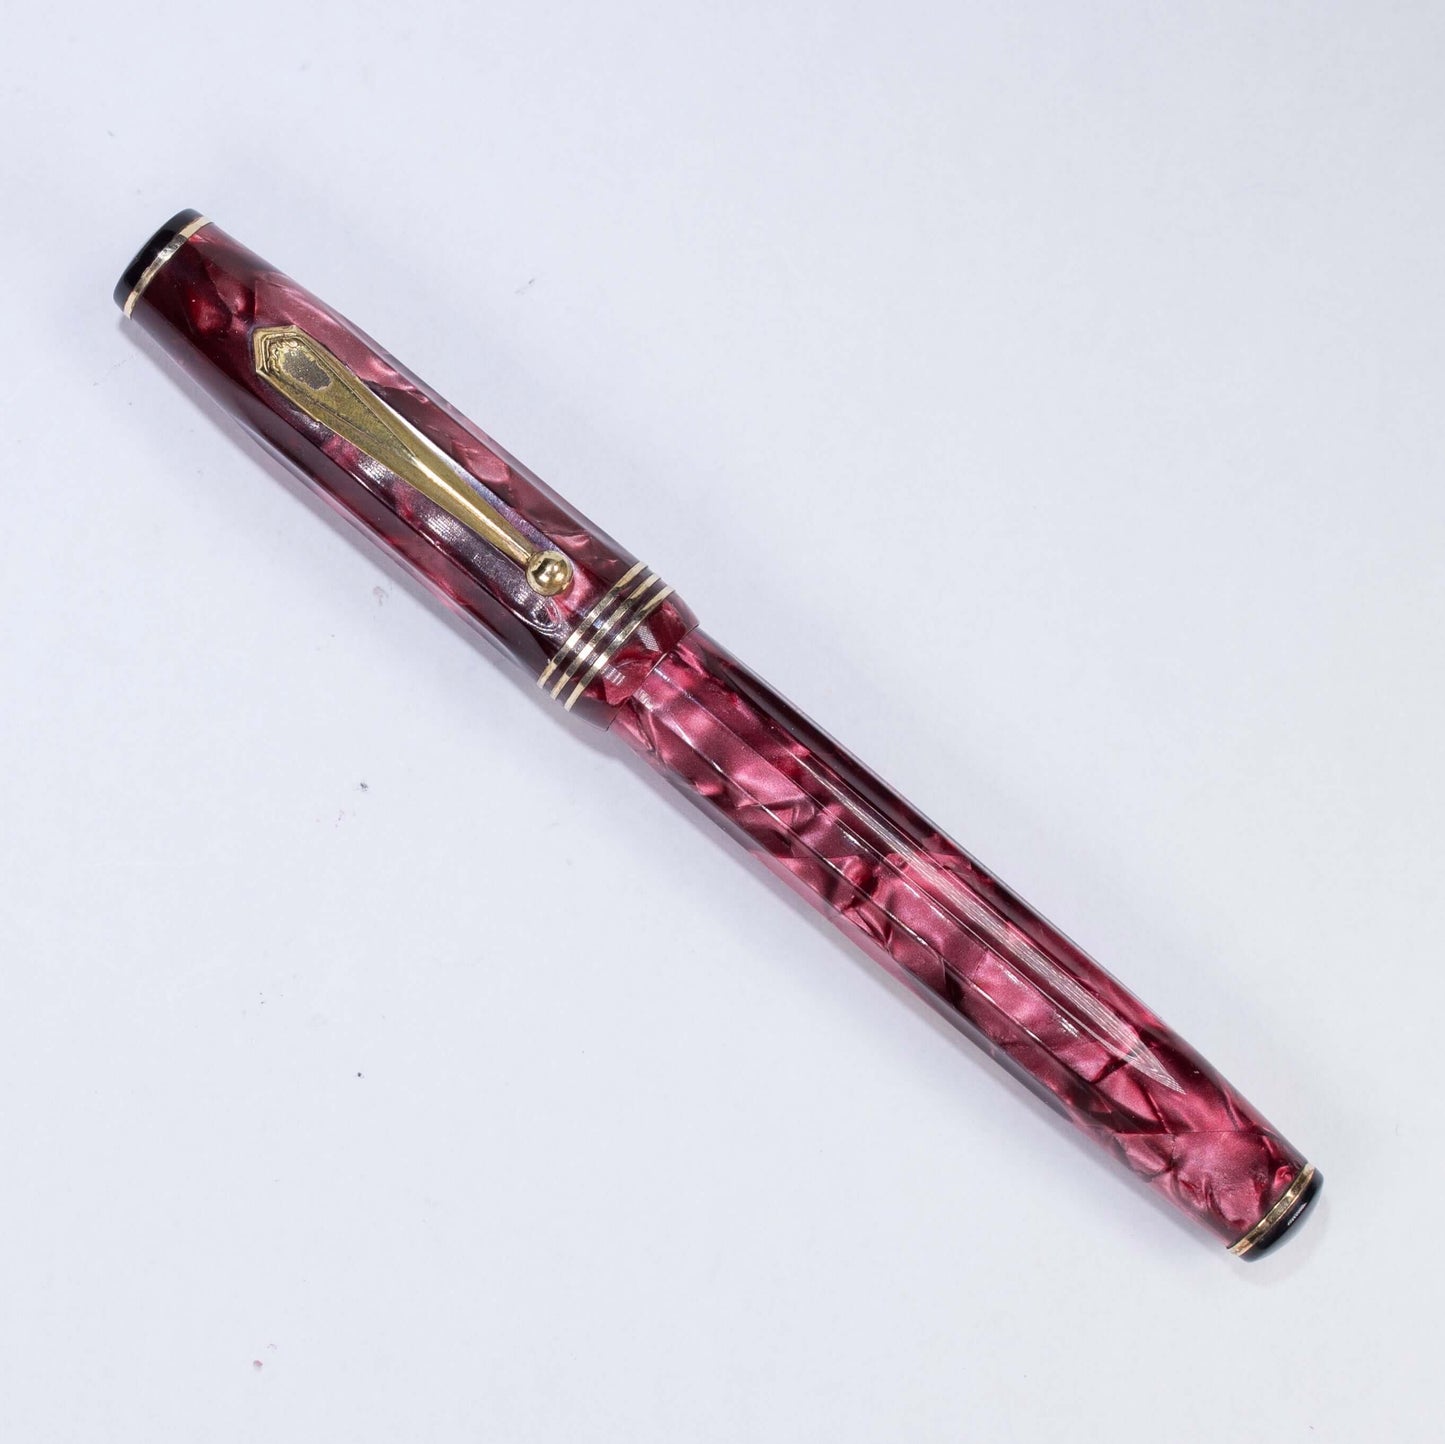 Parker Parkette Deluxe Red Marbled and Fluted Fountain Pen. Fully restored with a Fine 14K gold Parkette Nib Name/Type: Parkette Deluxe by Parker Manufacture Year: 1936 Length: 5 Filling System: Lever filler with new sac Color/Pattern: Red marbled fluted